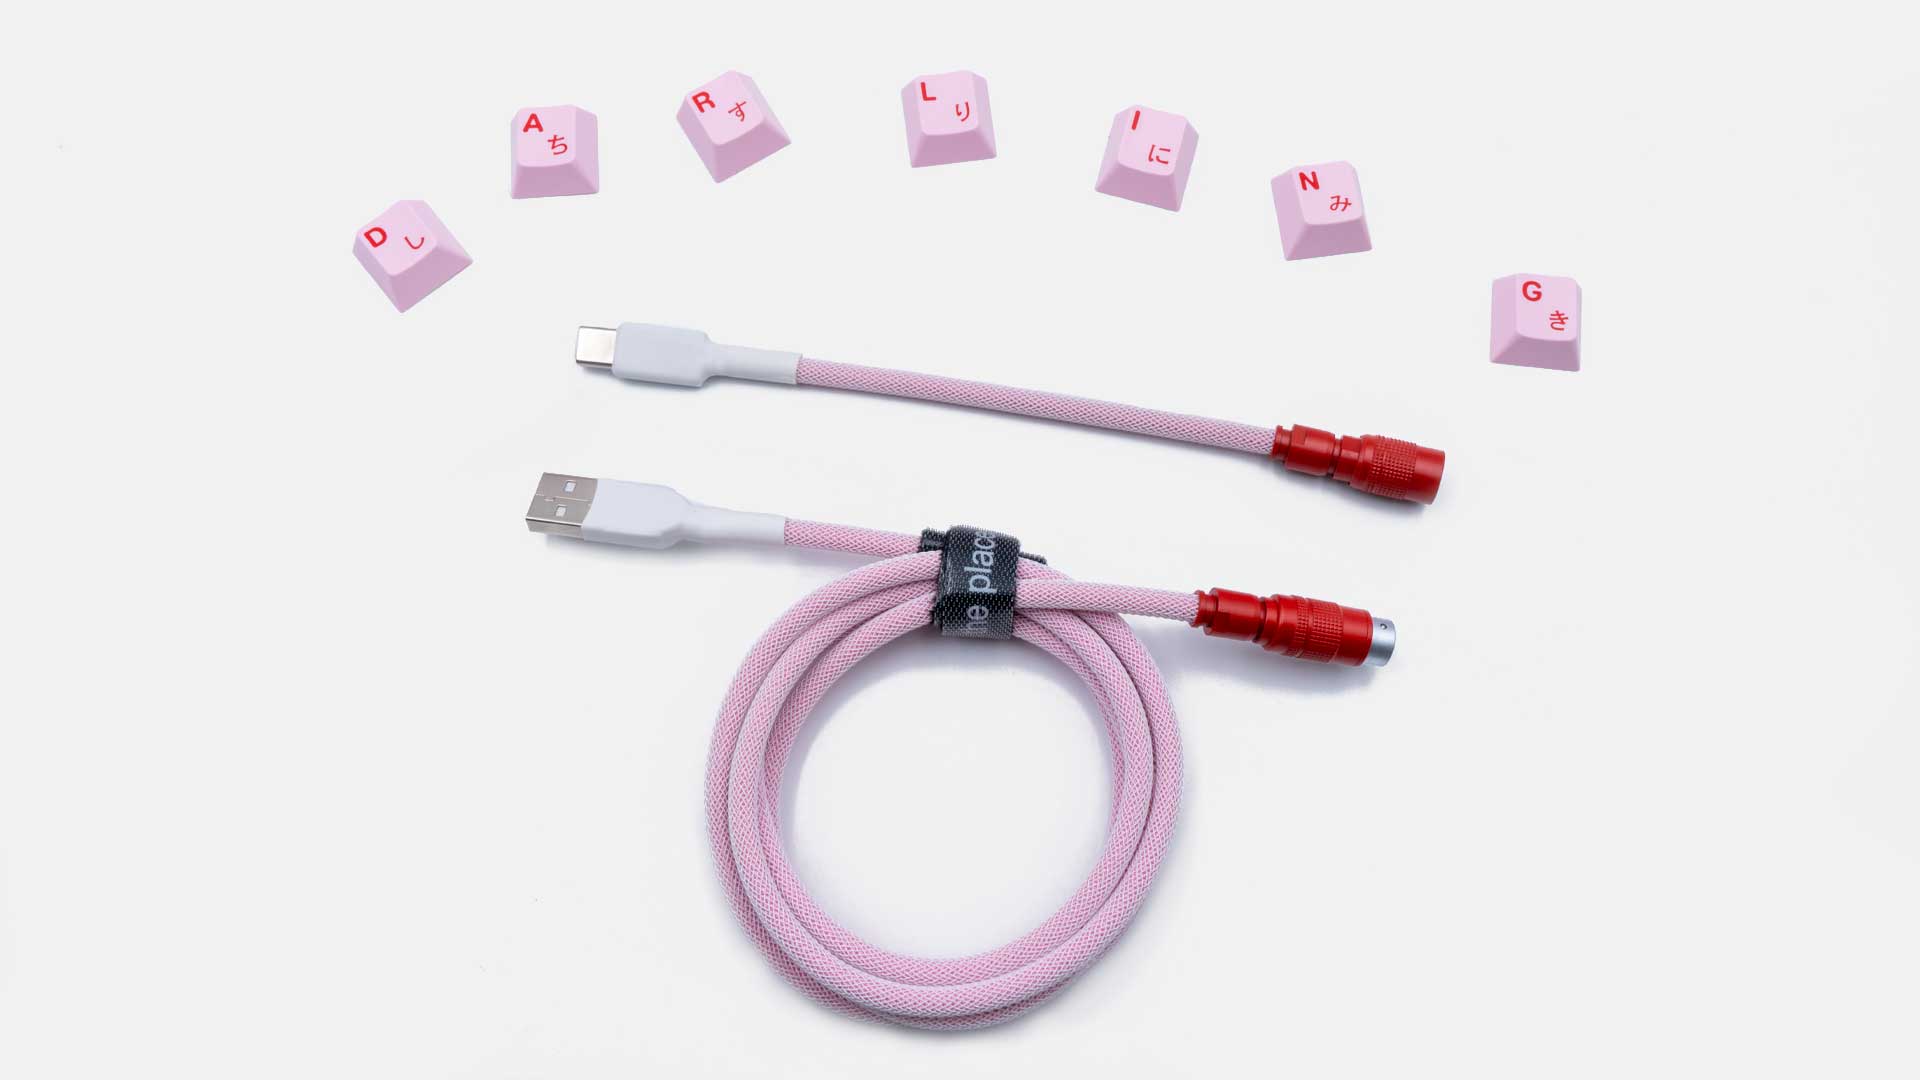 DARLING YC8 CABLE-Space Cables-coiled keyboard cable-coiled usb c cable-coiled cable keyboard